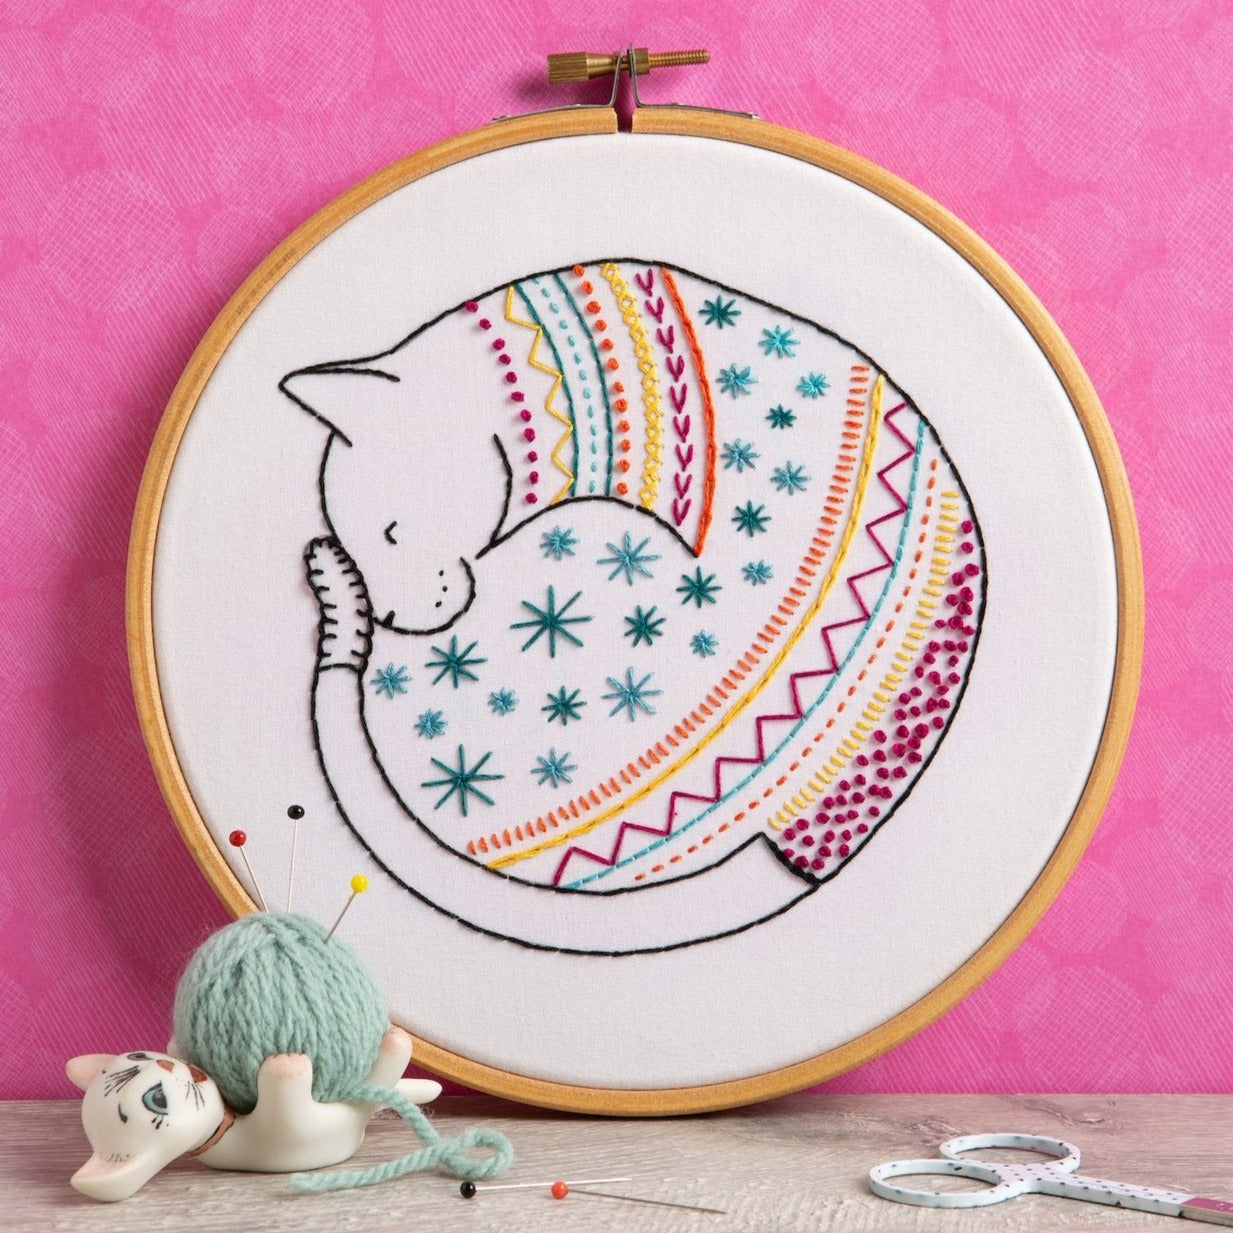 Cat Embroidery Kit